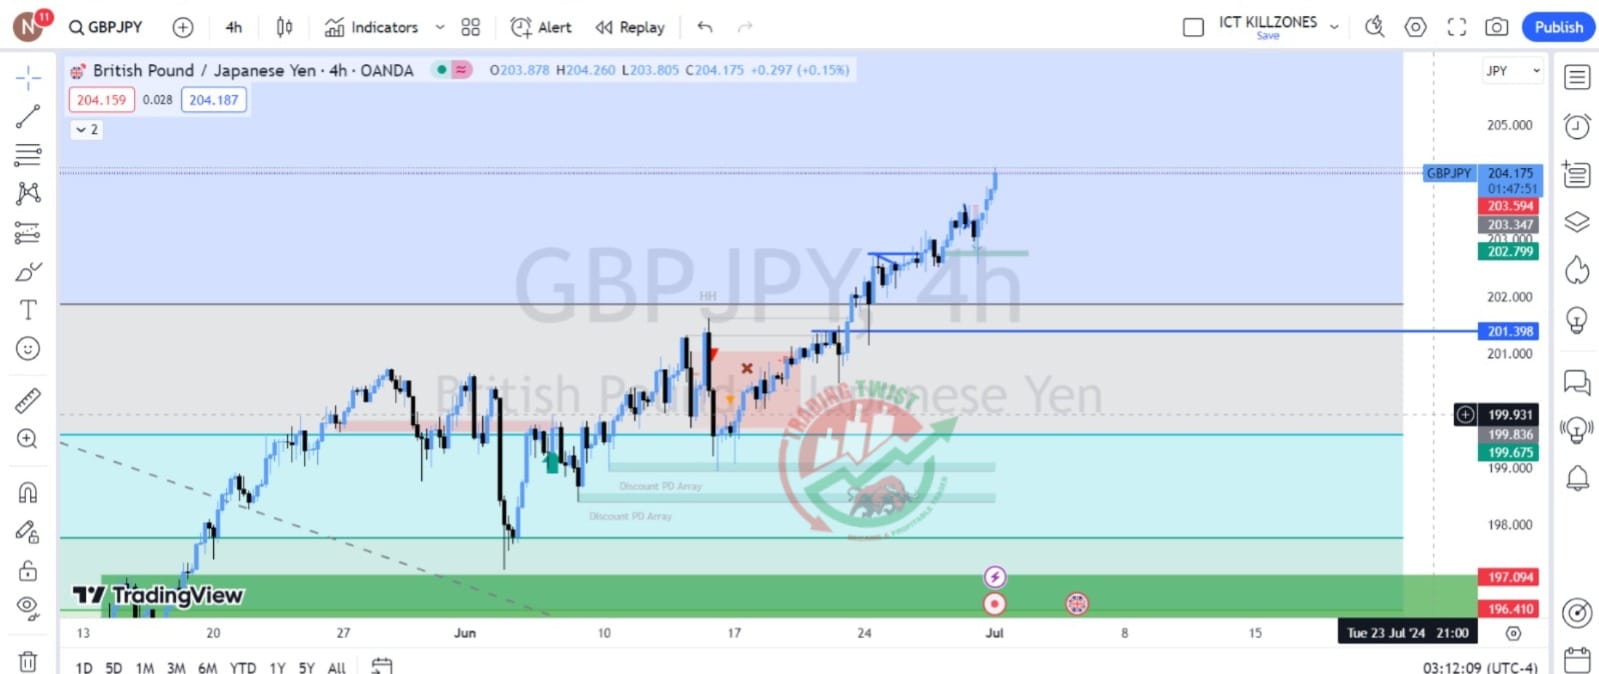 GBPJPY Chart Technical Outlook